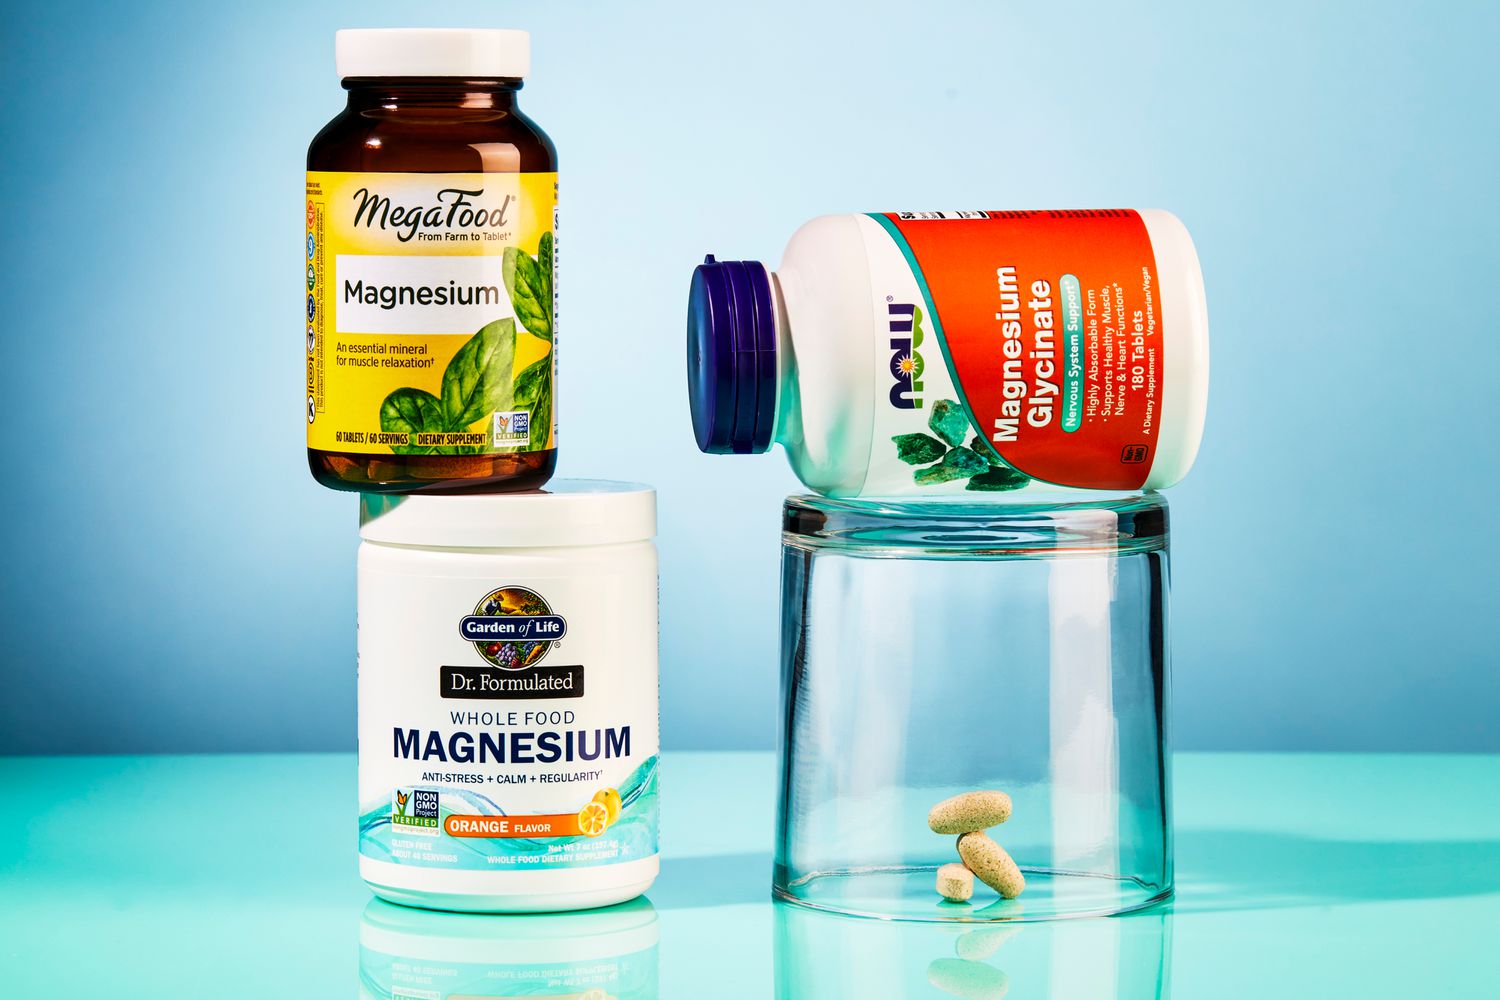 How Fast Does Magnesium Make You Poop